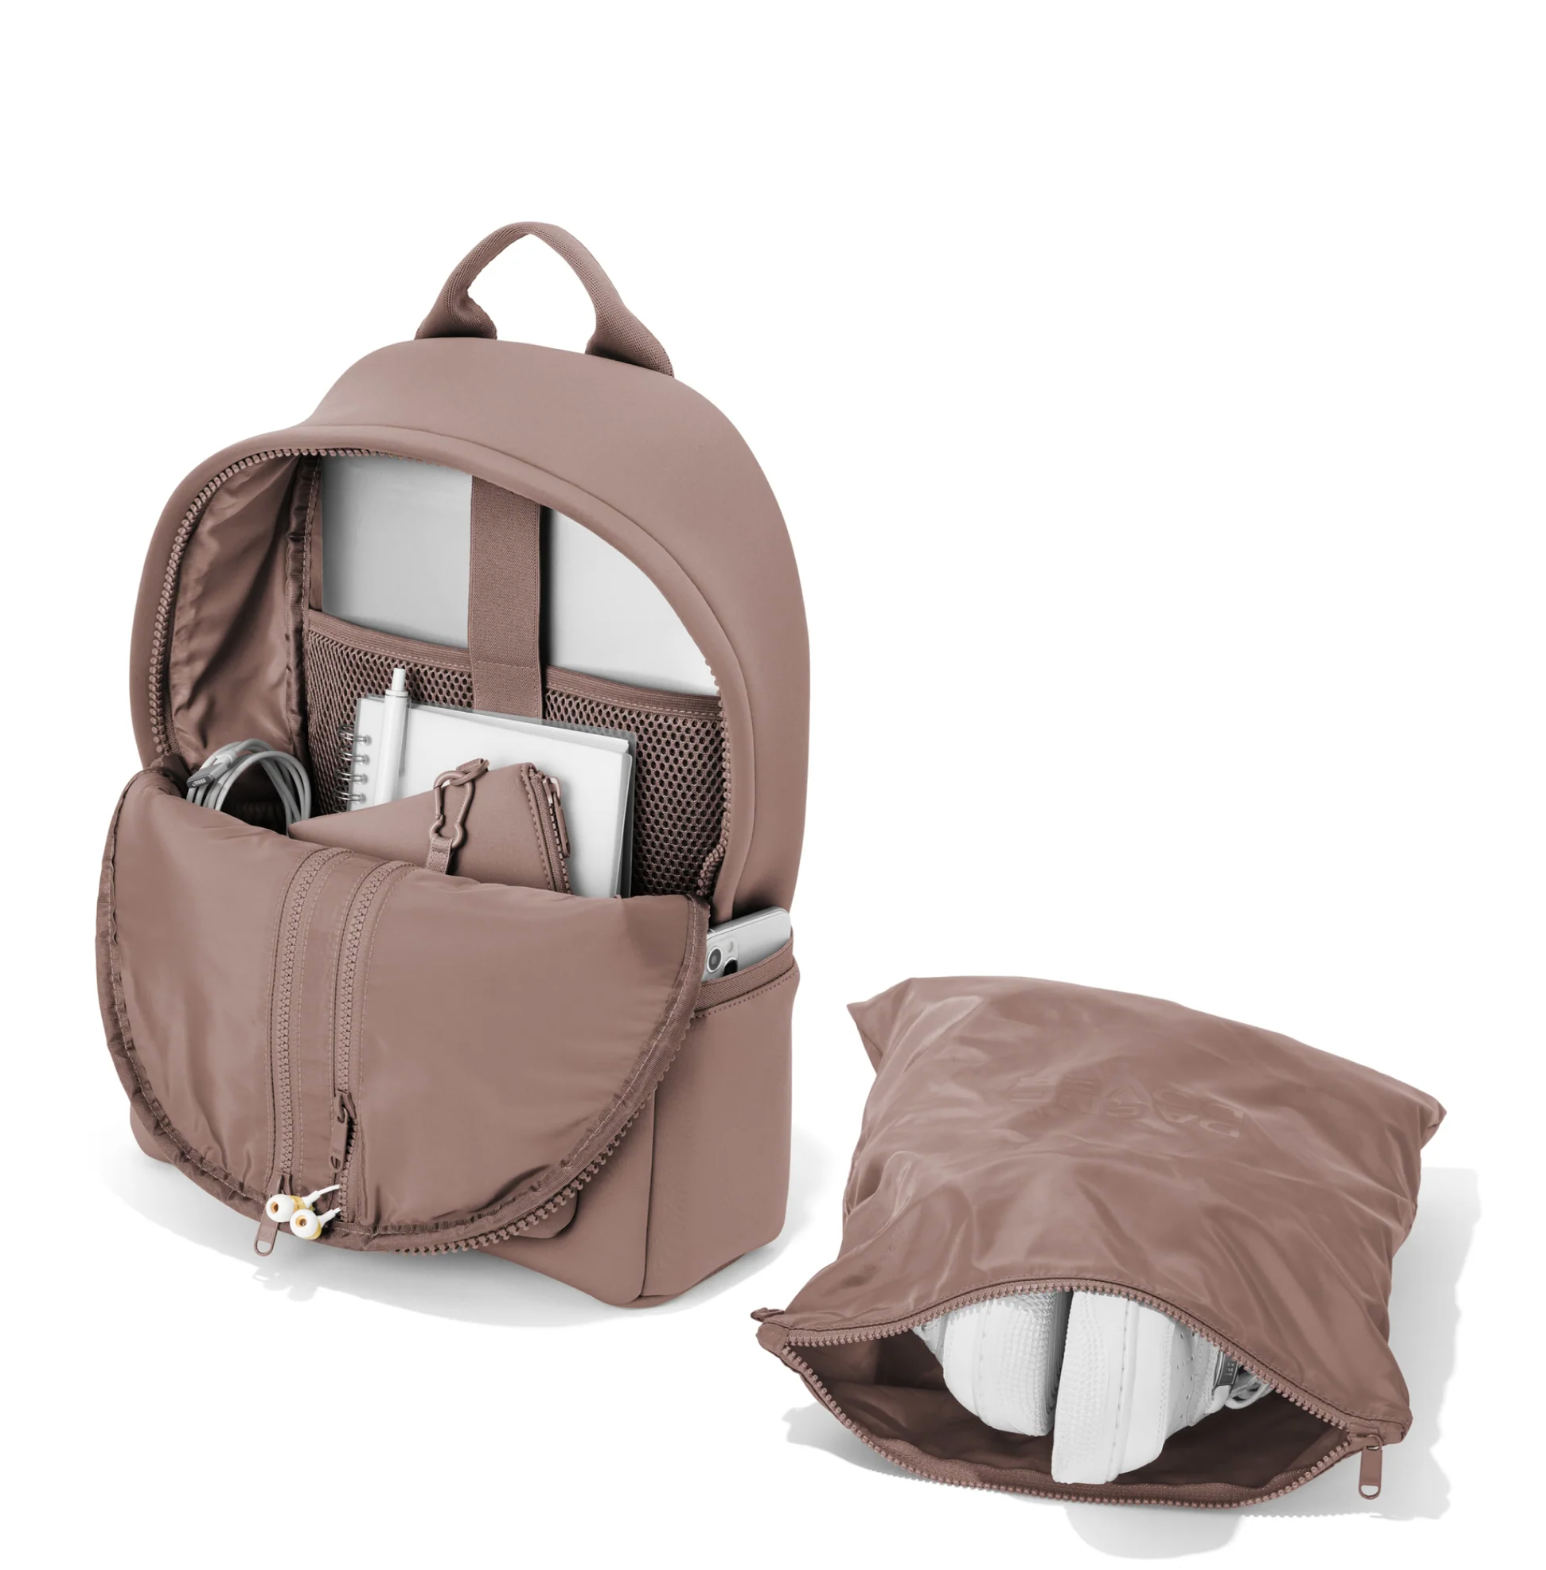 Bags That Hold Laptops